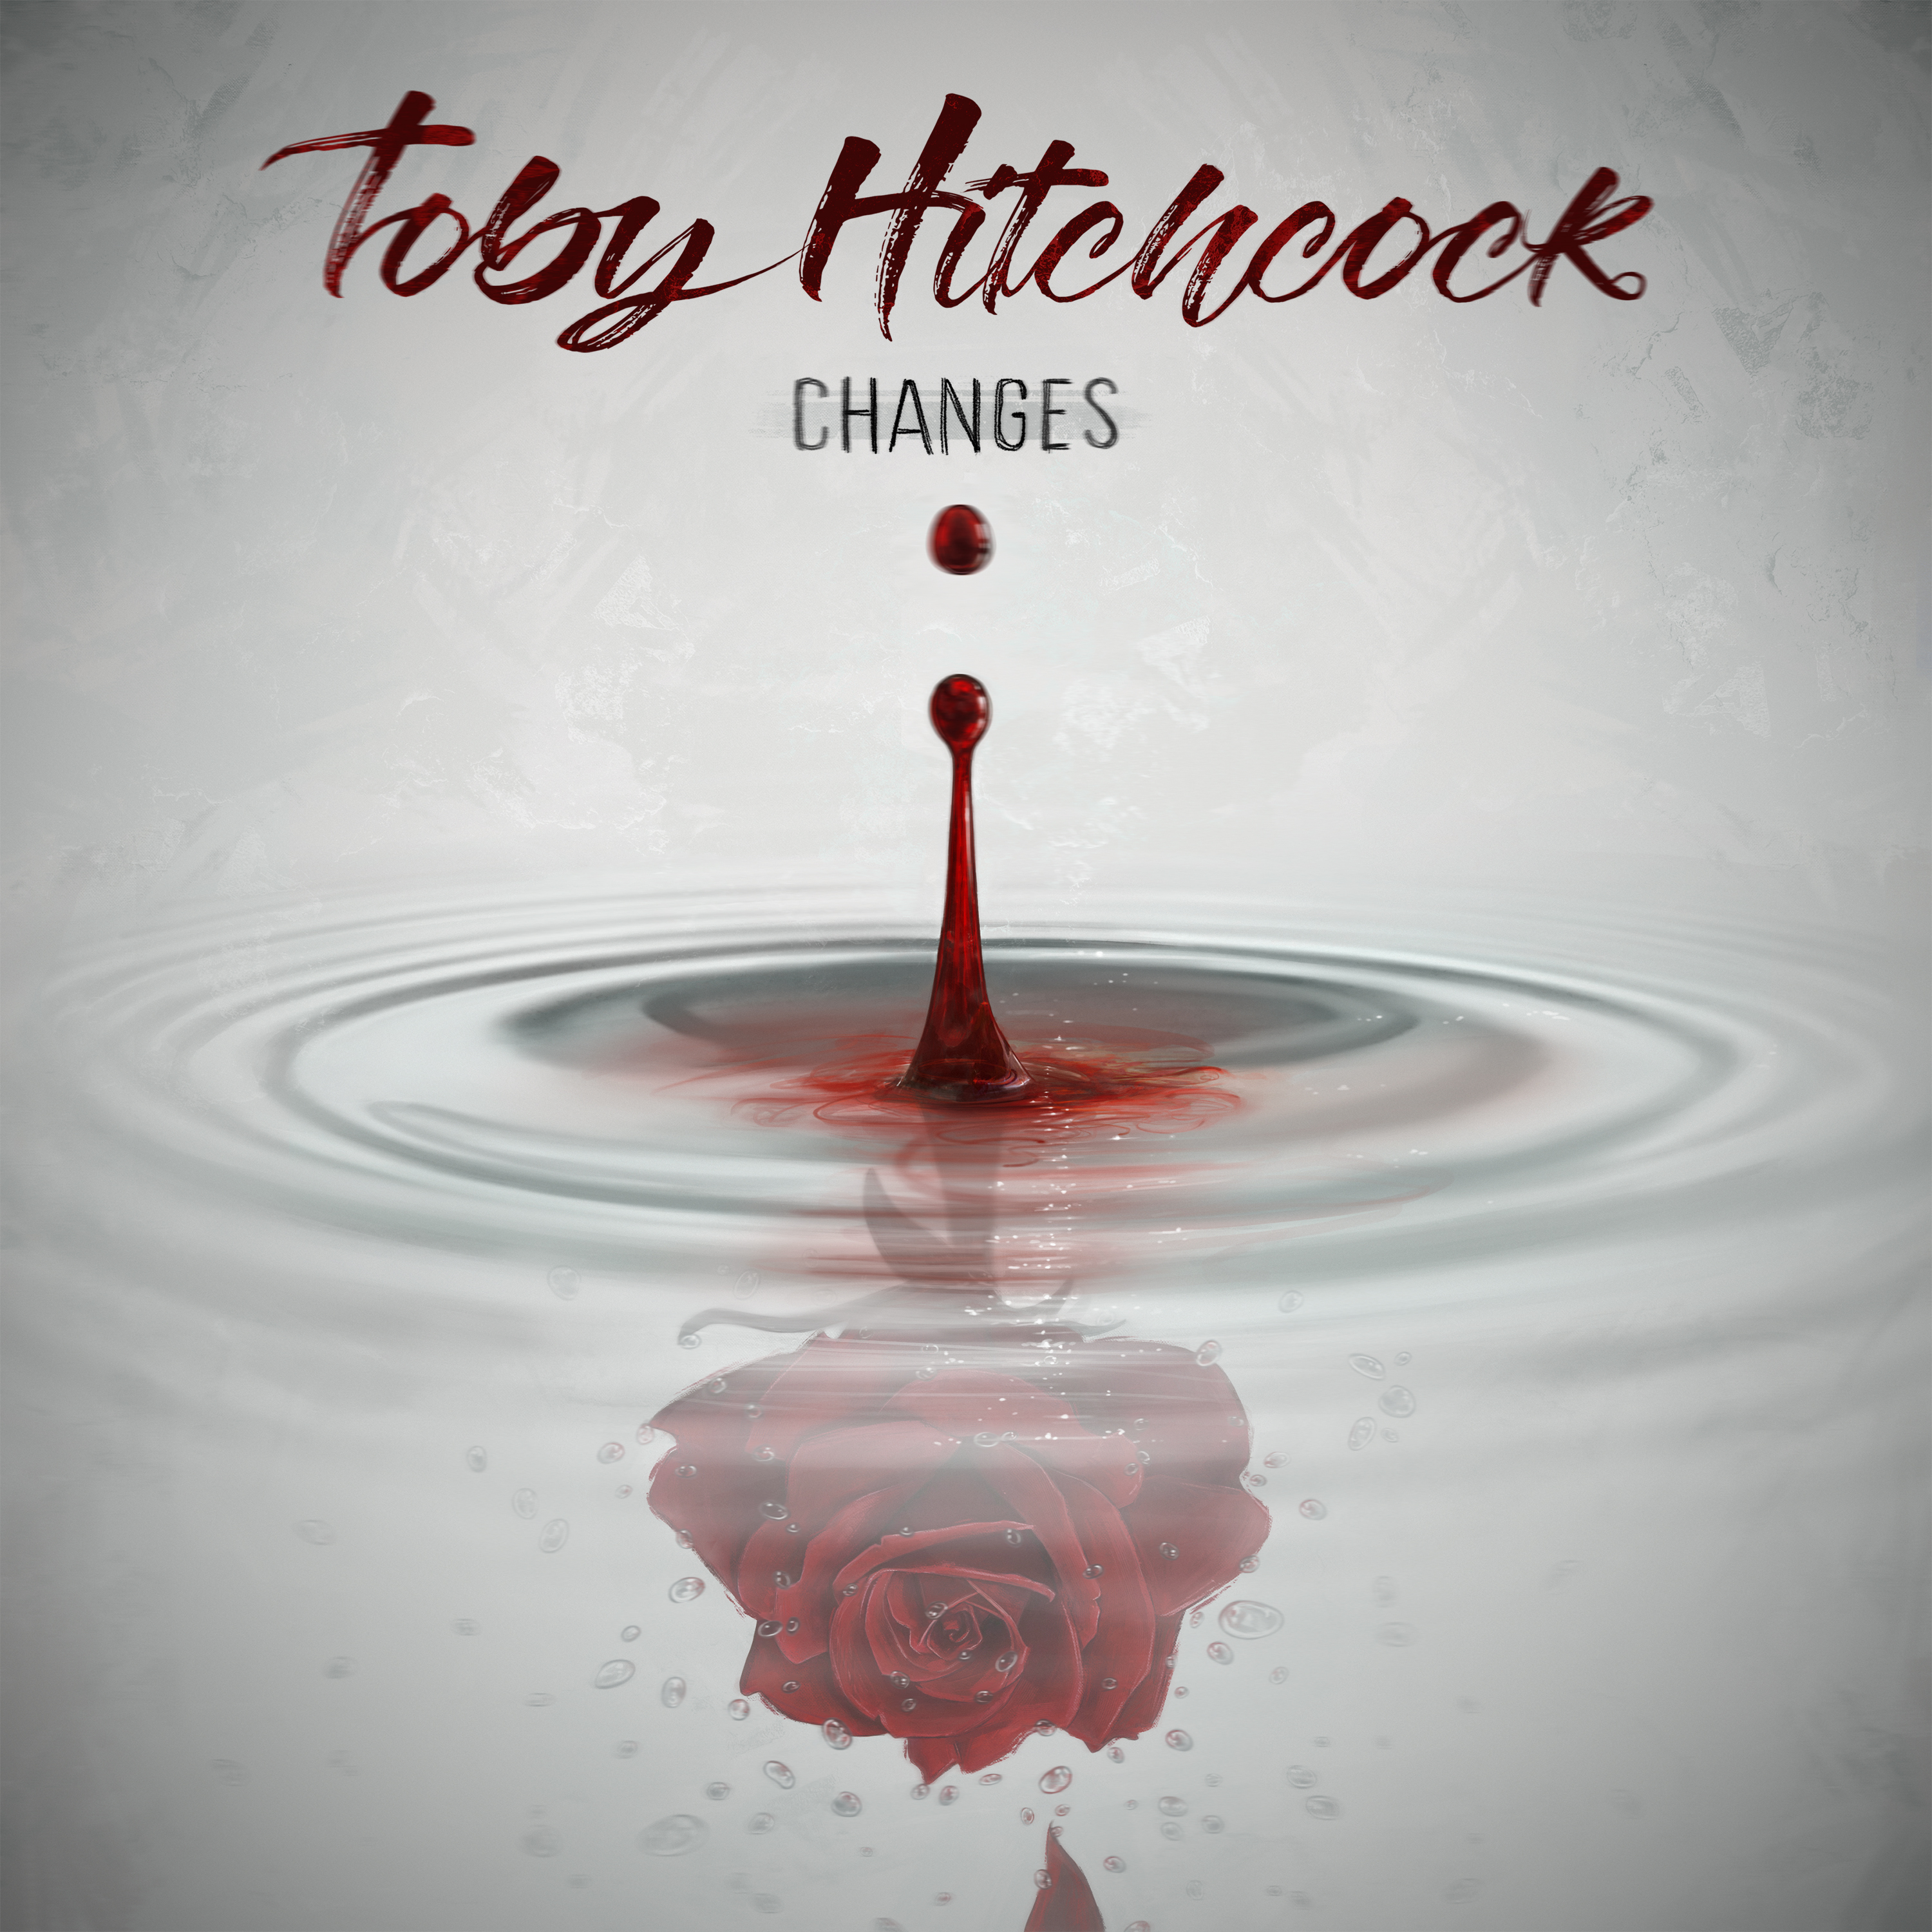 Toby Hitchcock - Changes - CD